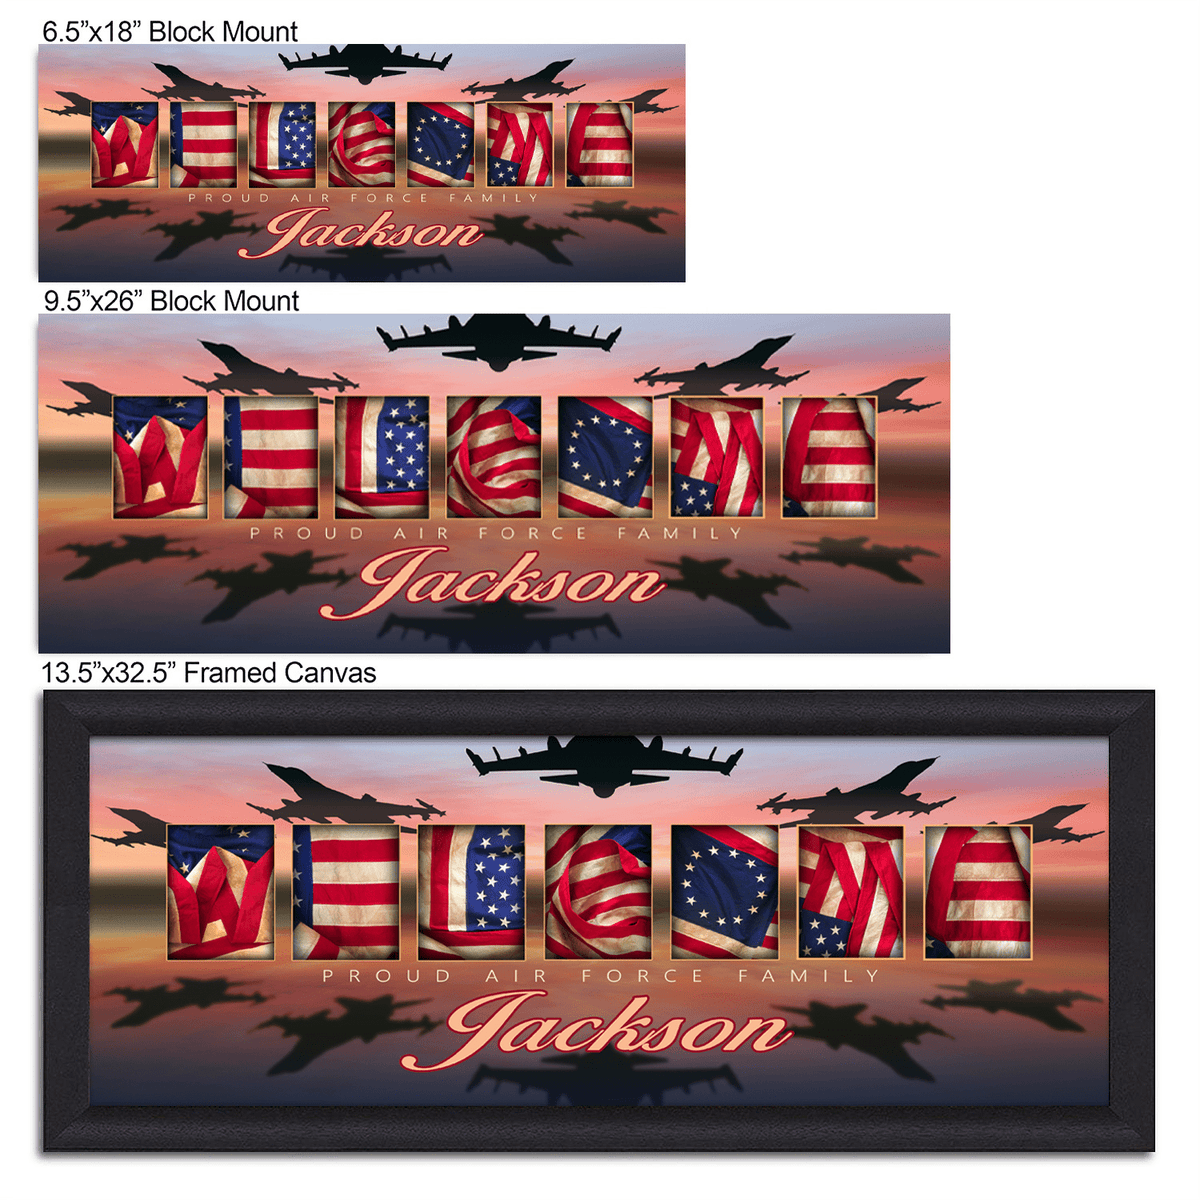 Air Force Art size display options